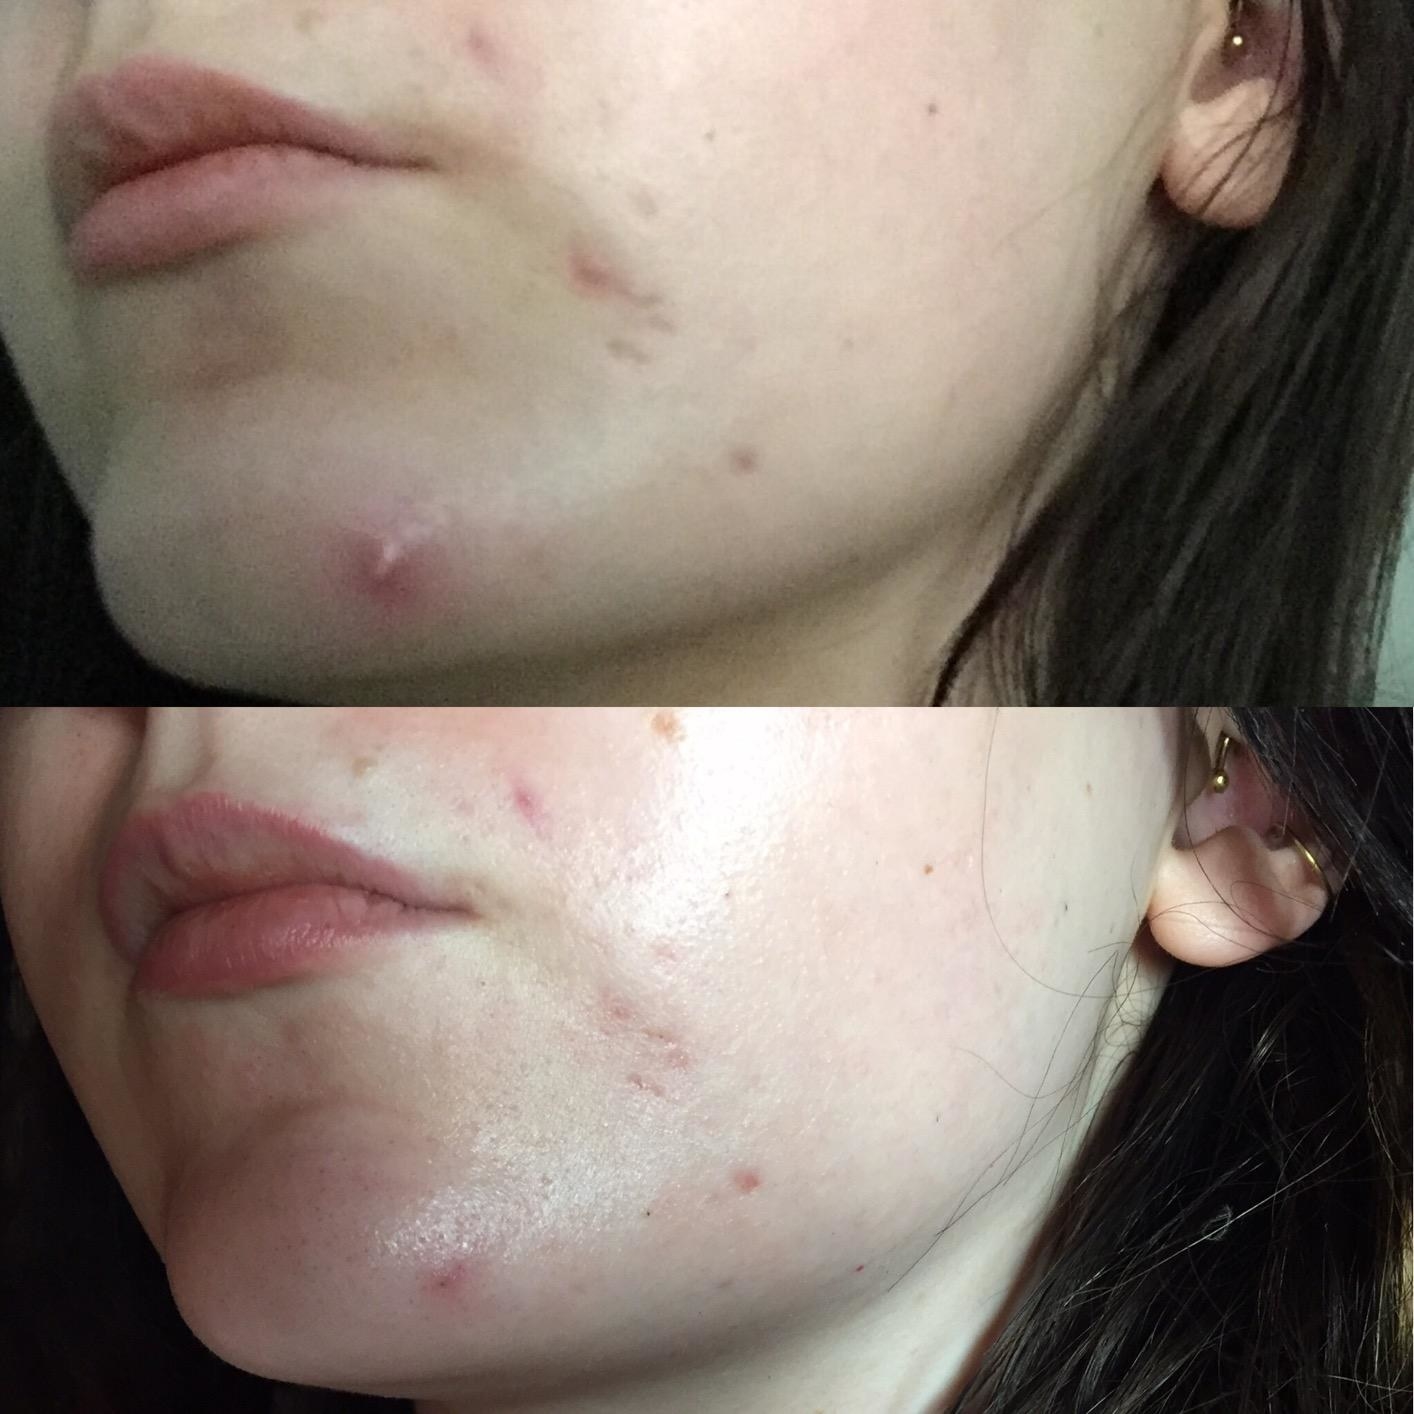 above, reviewer with a large pimple on their chin. below, the pimple flattened